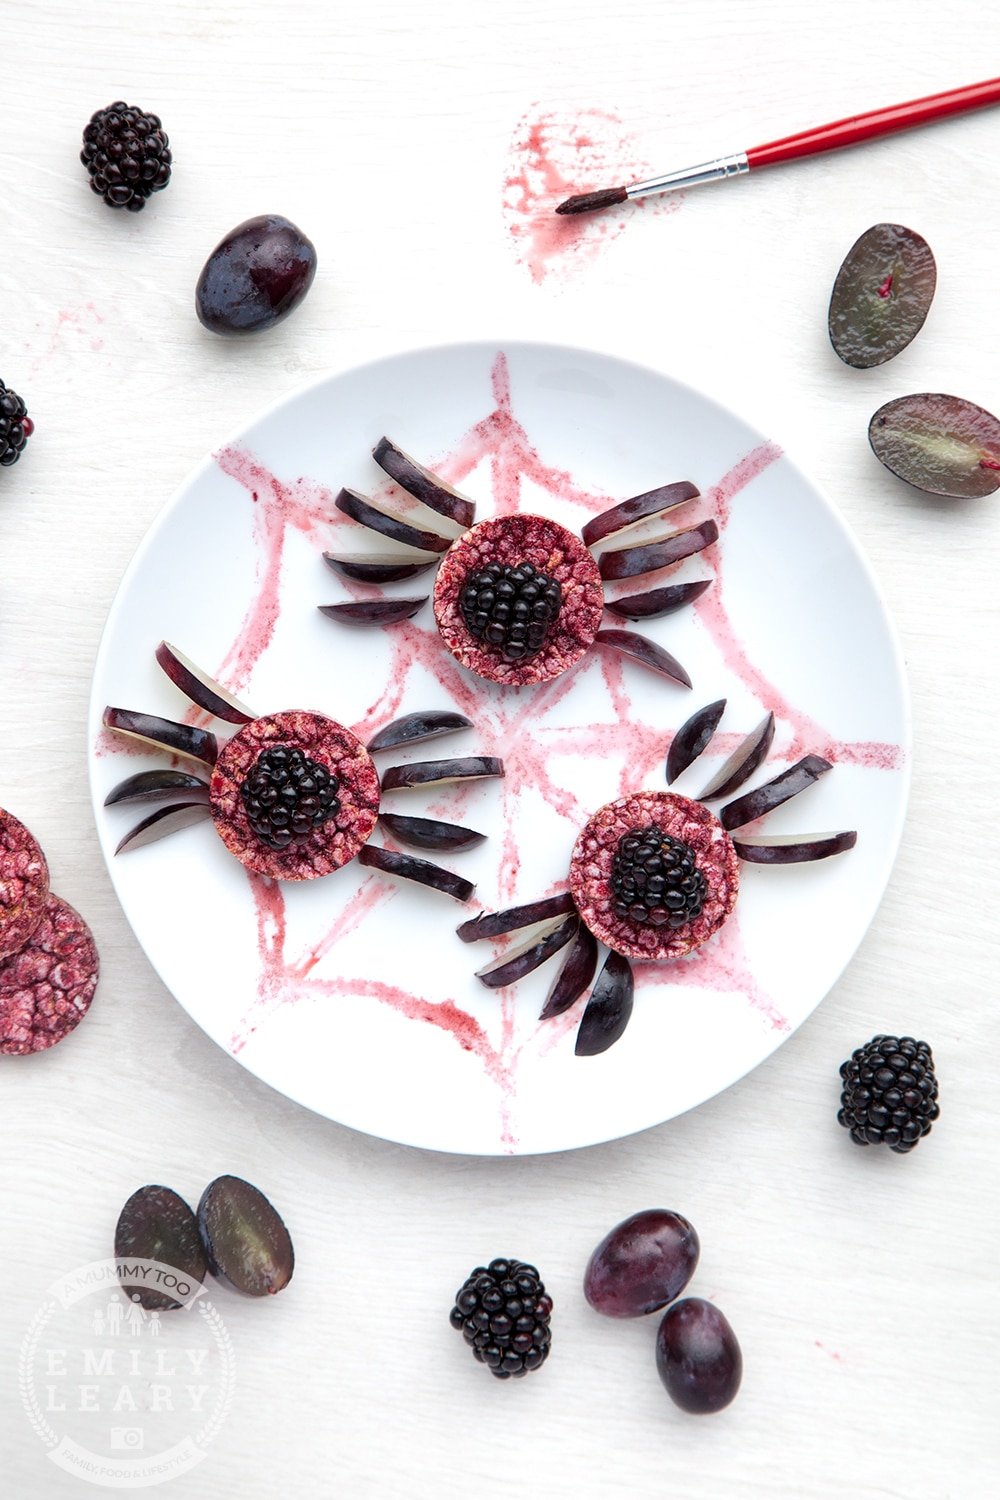 Halloween rice cakes, decorated with blackberries & grapes to look like spiders on a spider's web.